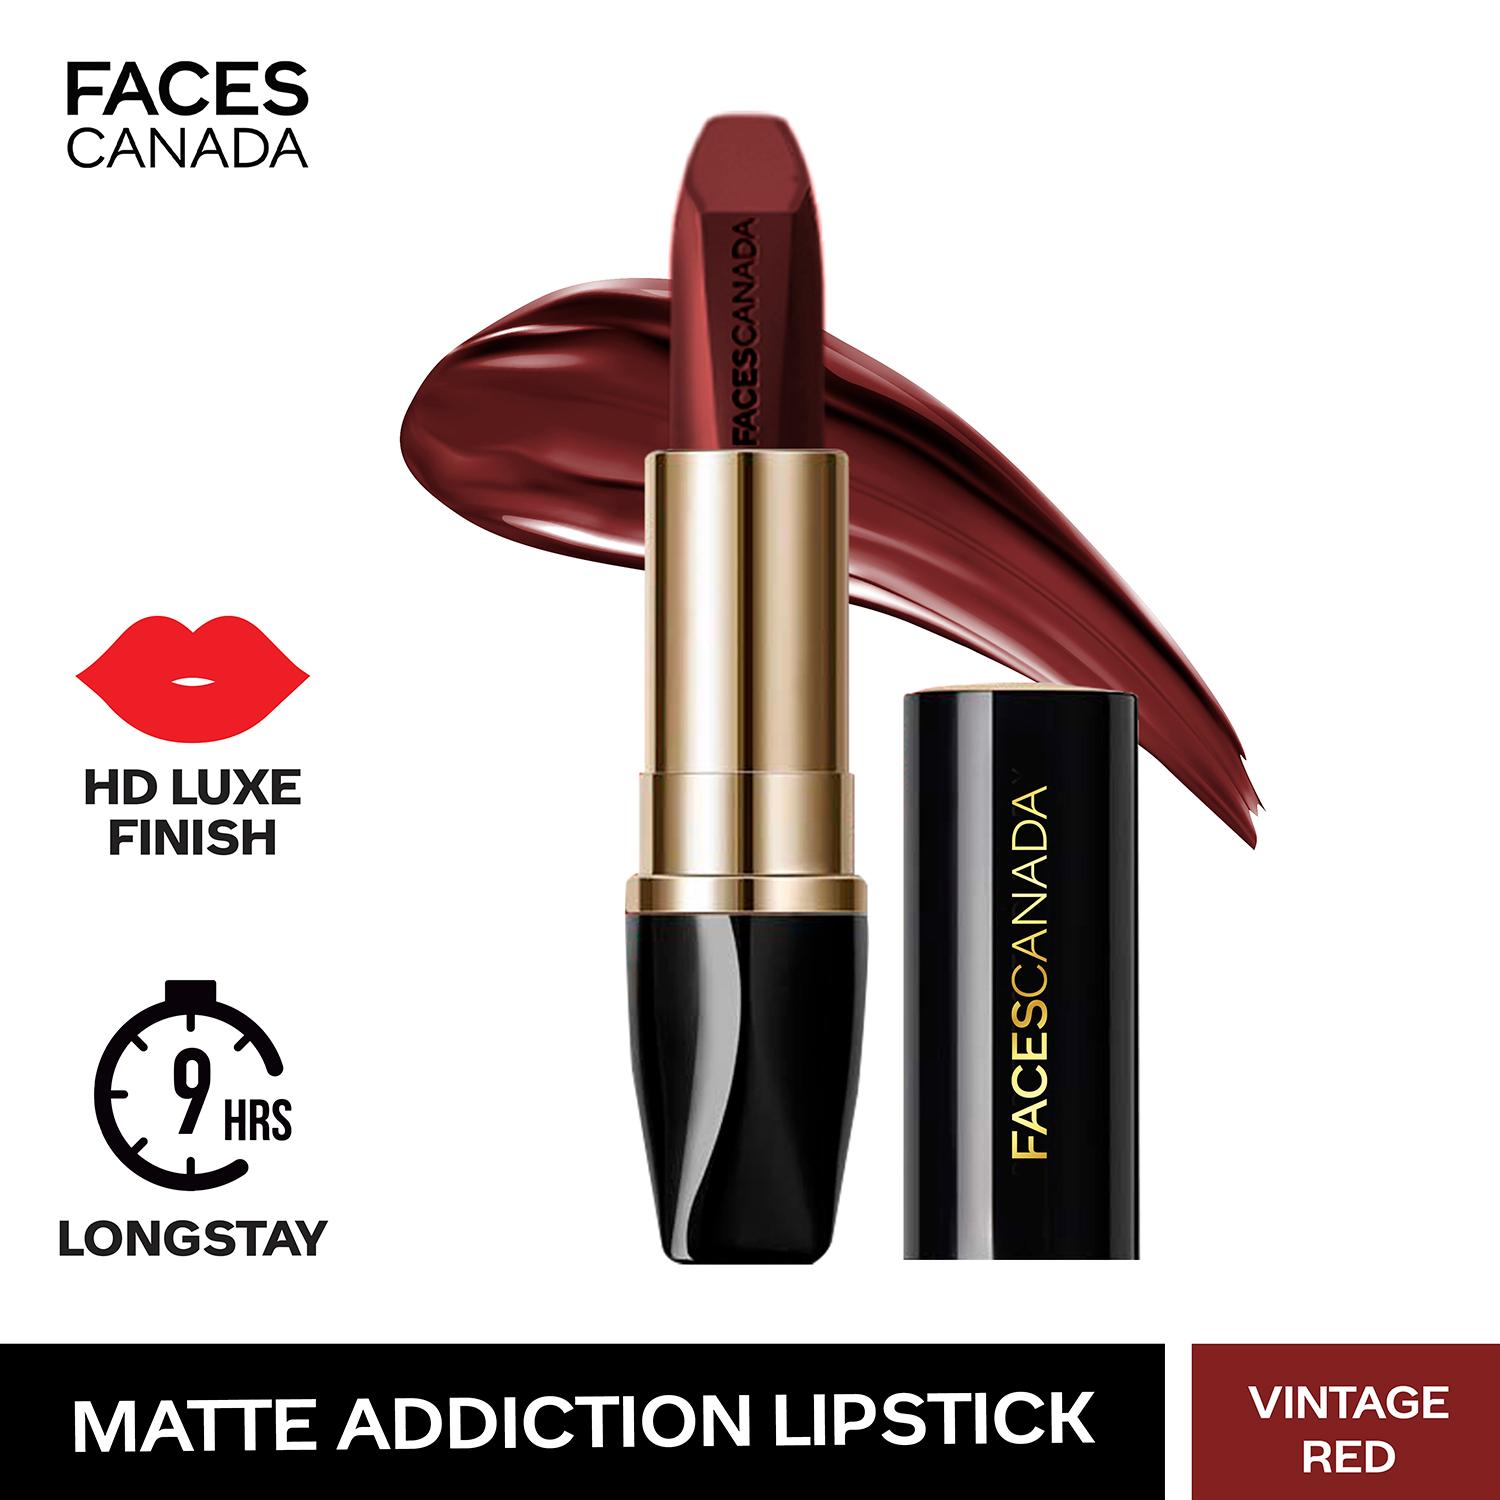 Faces Canada | Faces Canada Matte Addiction Lipstick, 9HR Stay, HD Finish, Intense Color - Vintage Red (3.7 g)